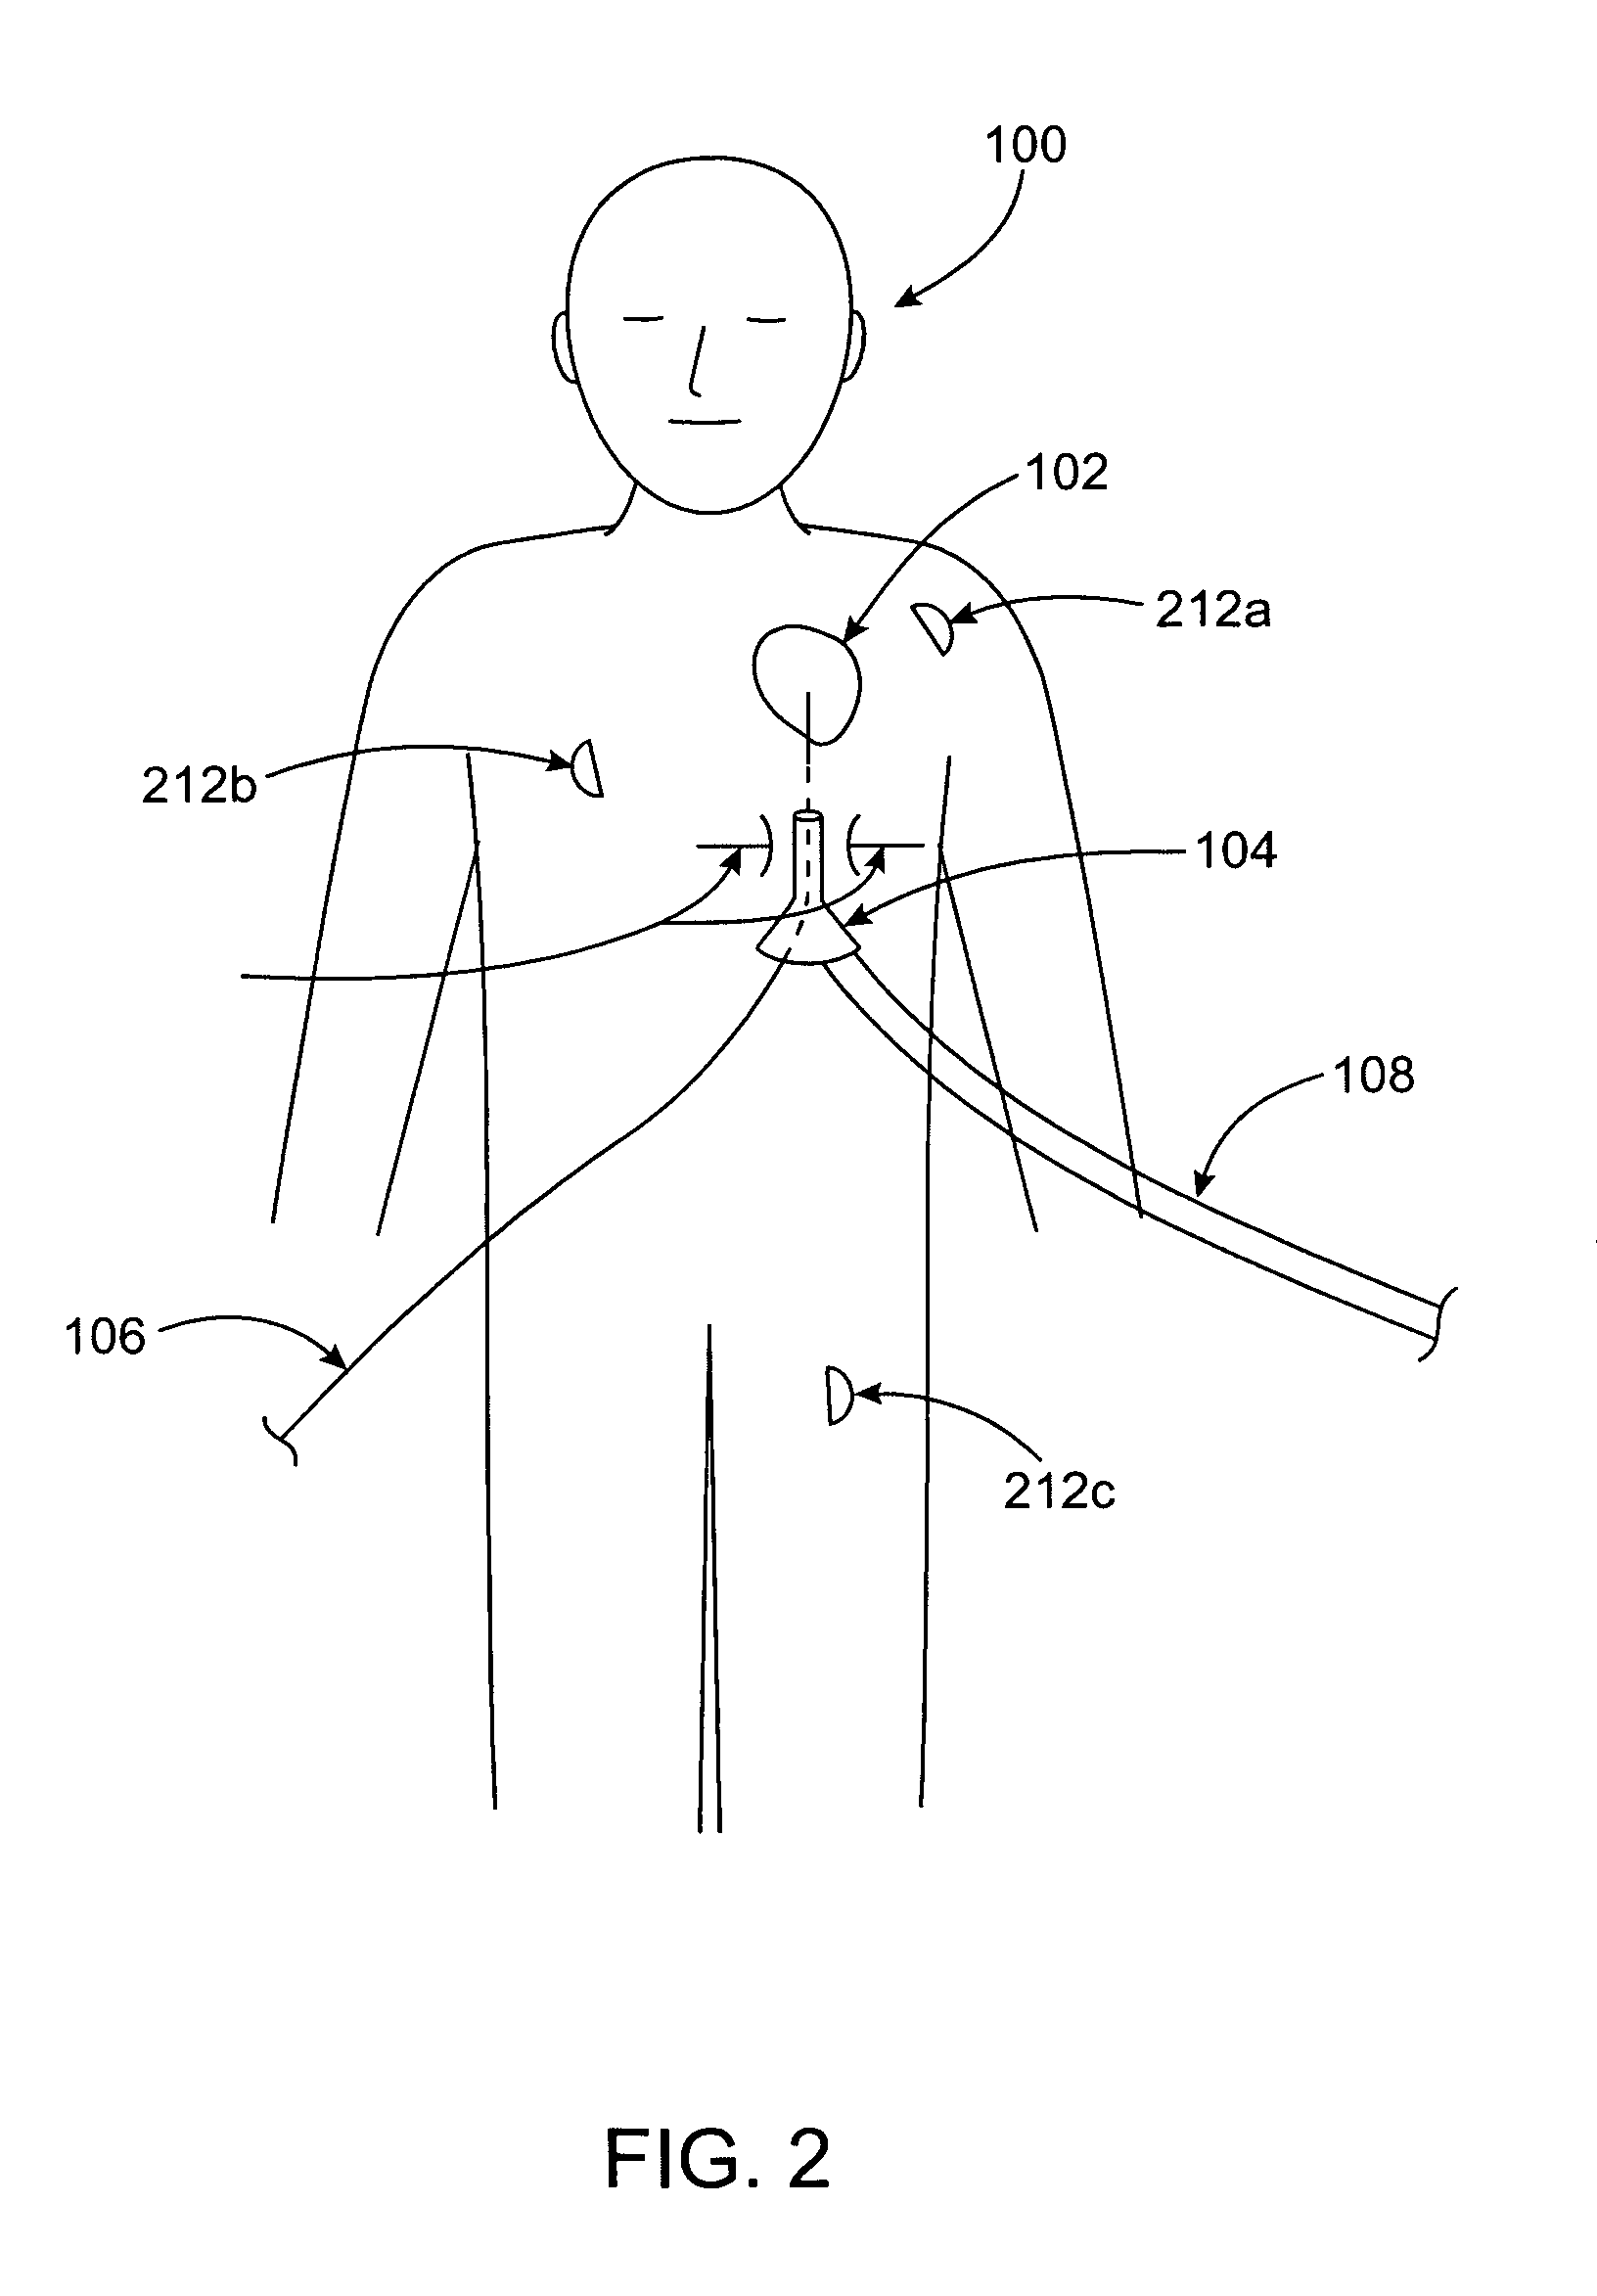 Methods and devices for minimally invasive cardiac surgery for atrial fibrillation